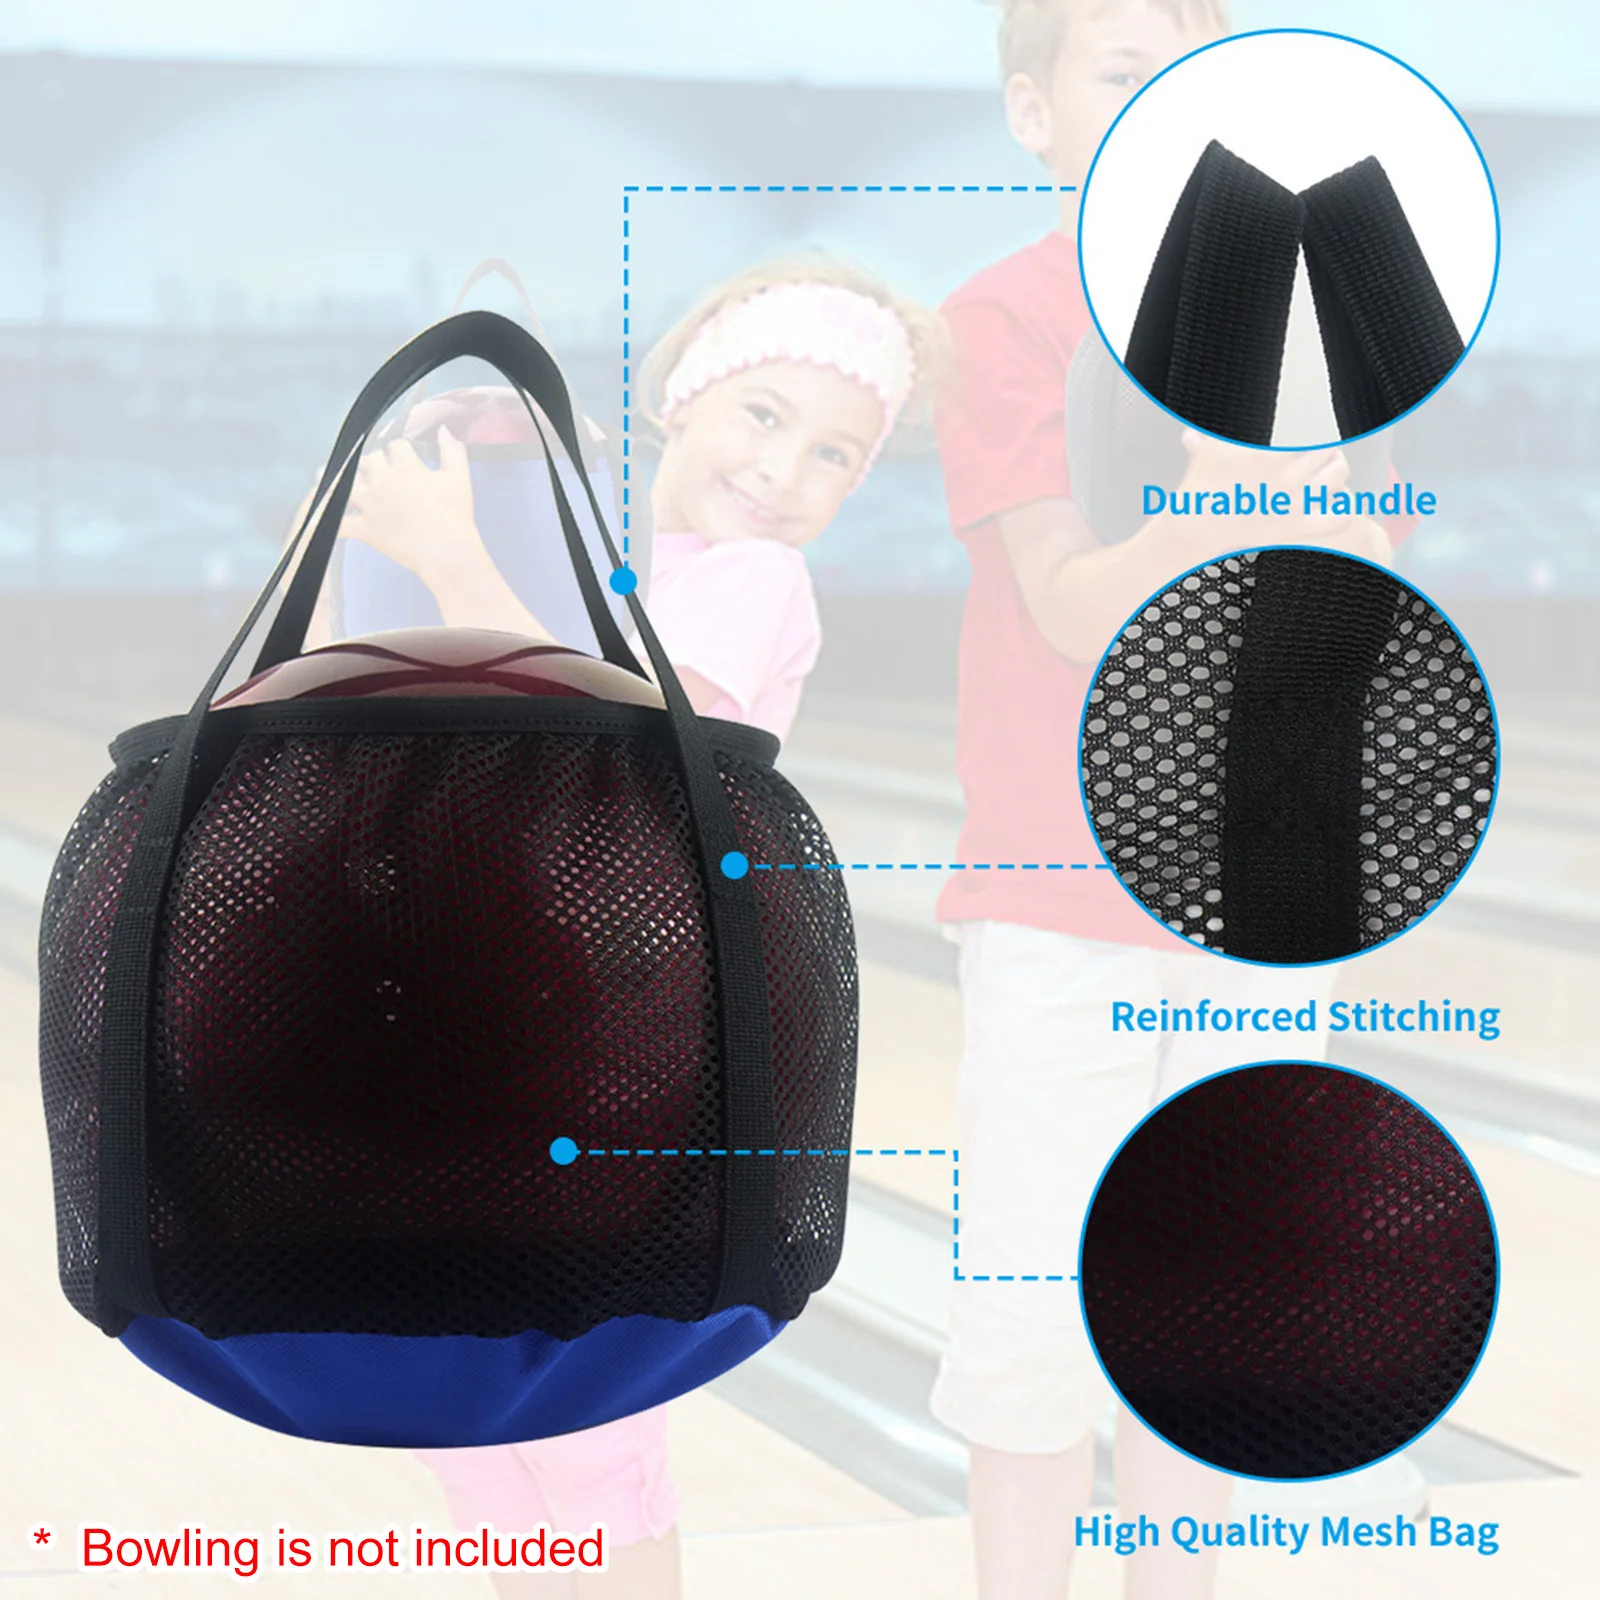 Convenient Bowling Bag Sticky Design As Shown Single Bowling Tote Bag Bowling Rack Small Items Bowling Tote Bag